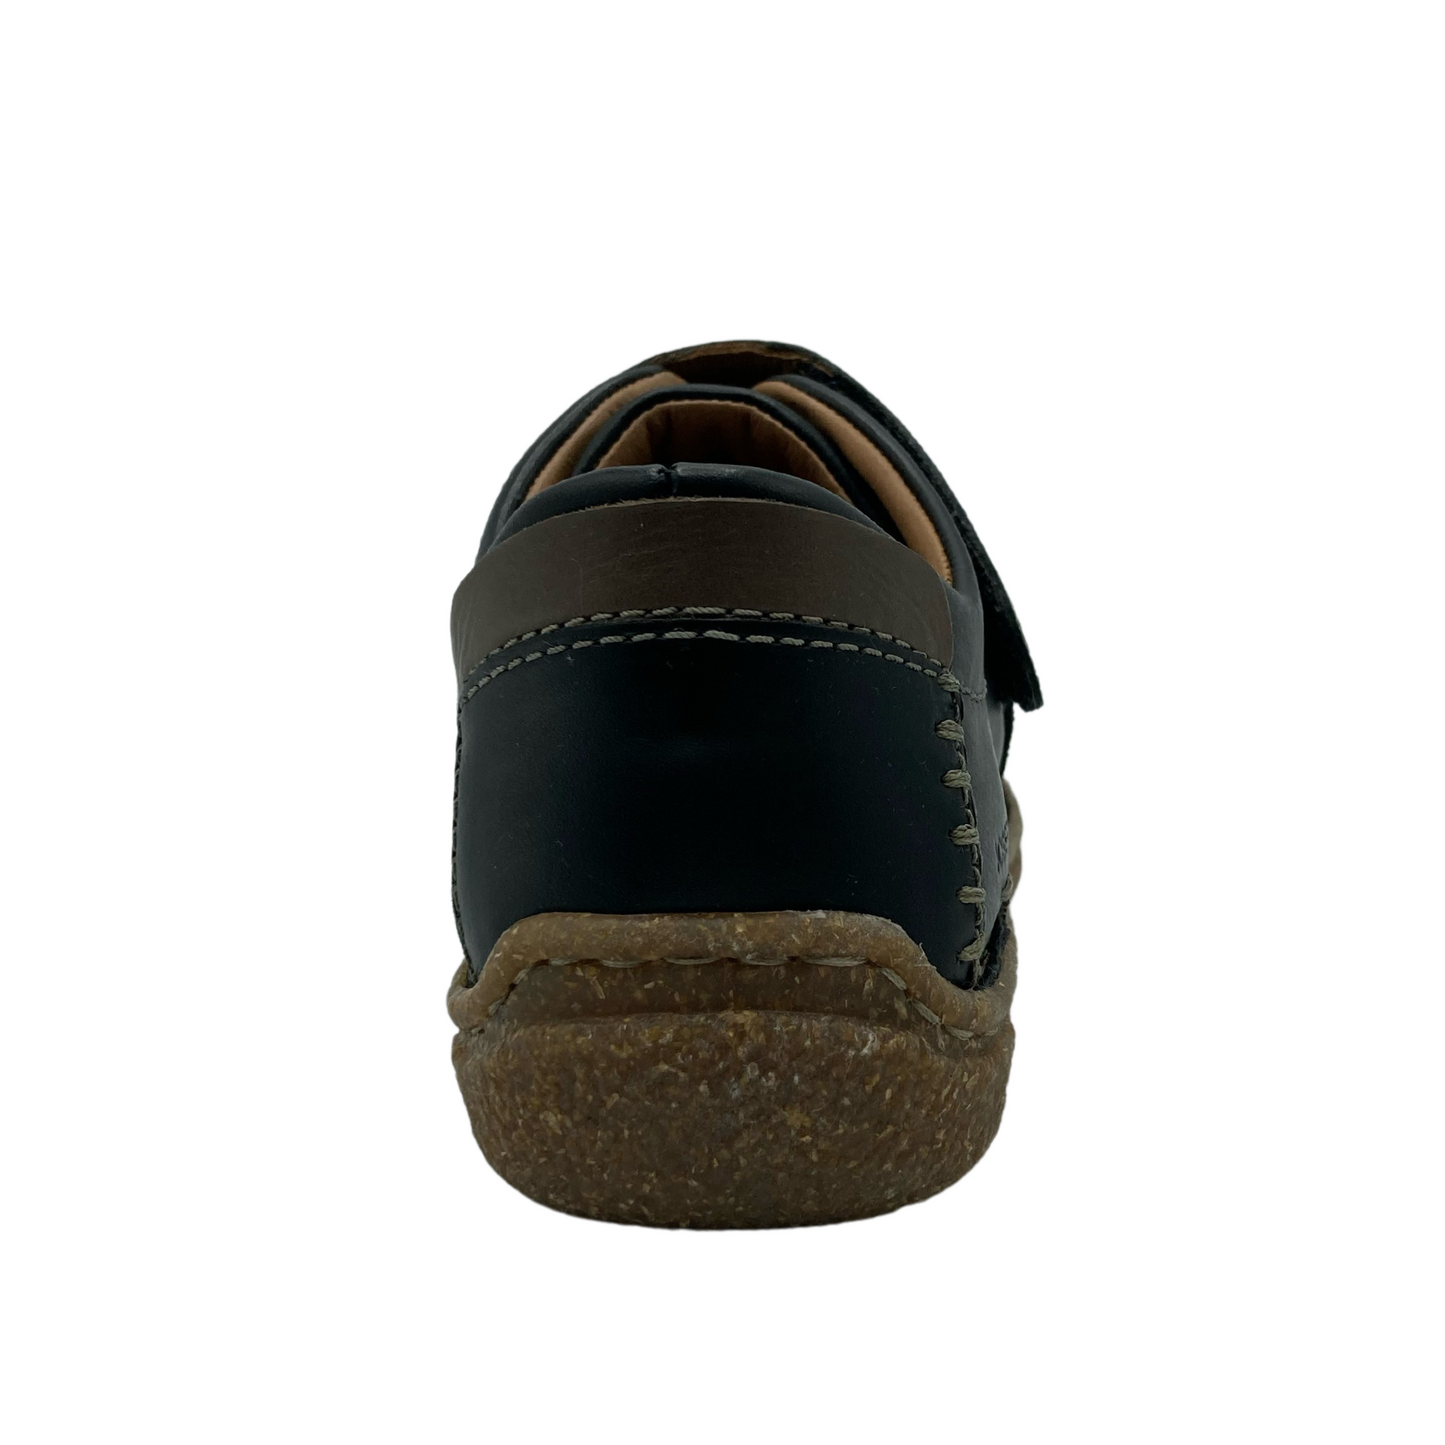 Back view of black and brown leather walking shoe with brown rubber sole